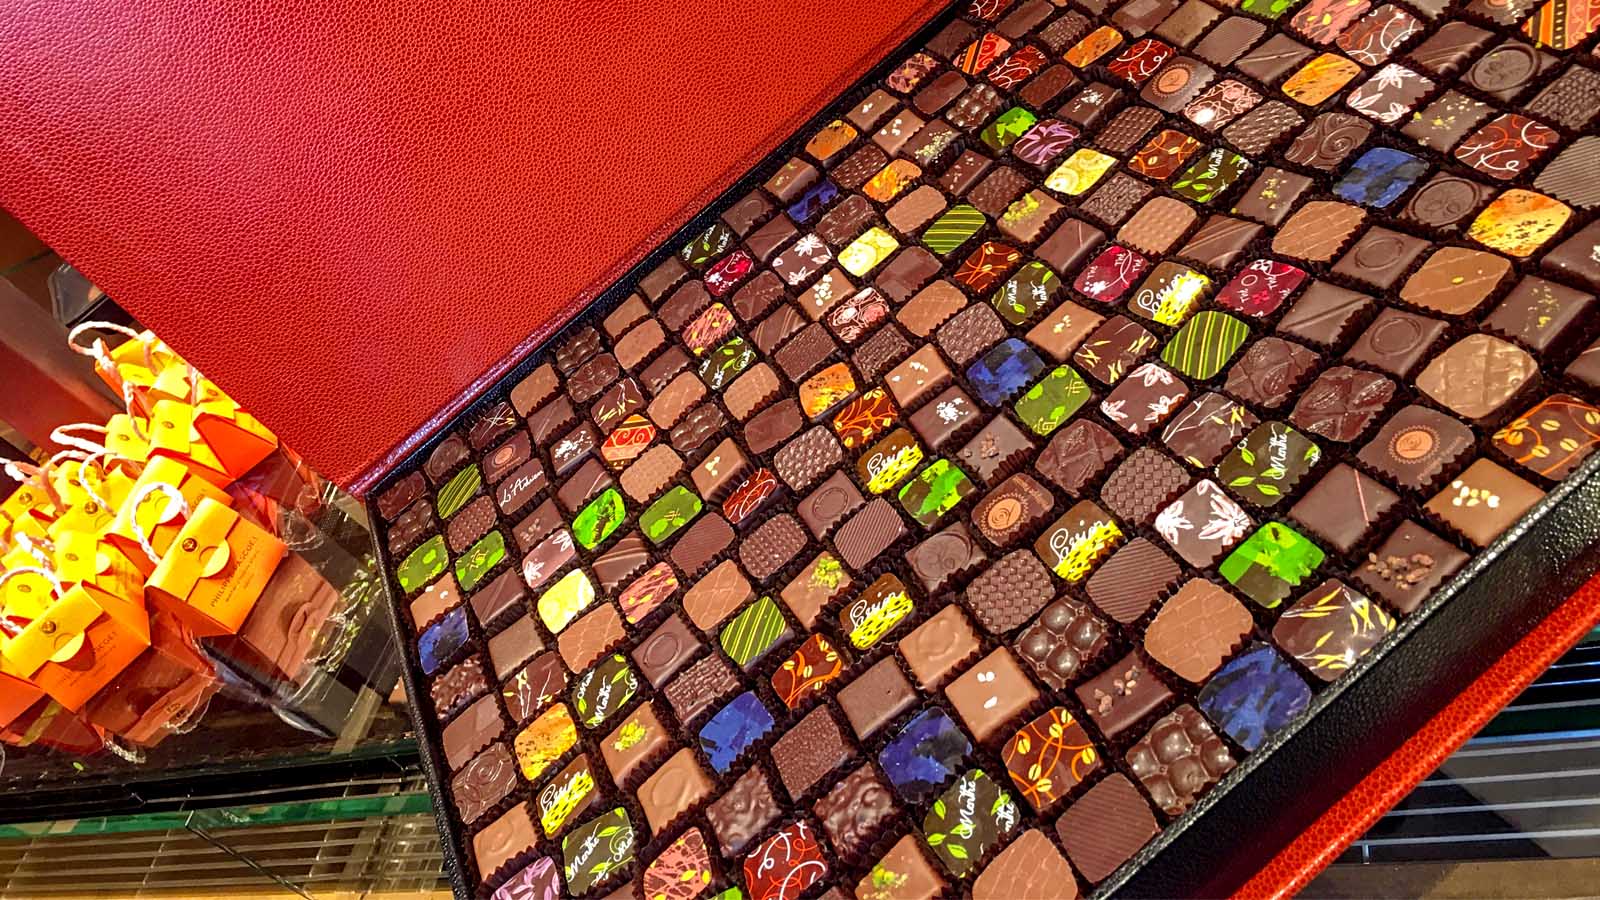  large orange box of colourful pralines during the Geneva chocolate tour organised by Local Flavours Tours